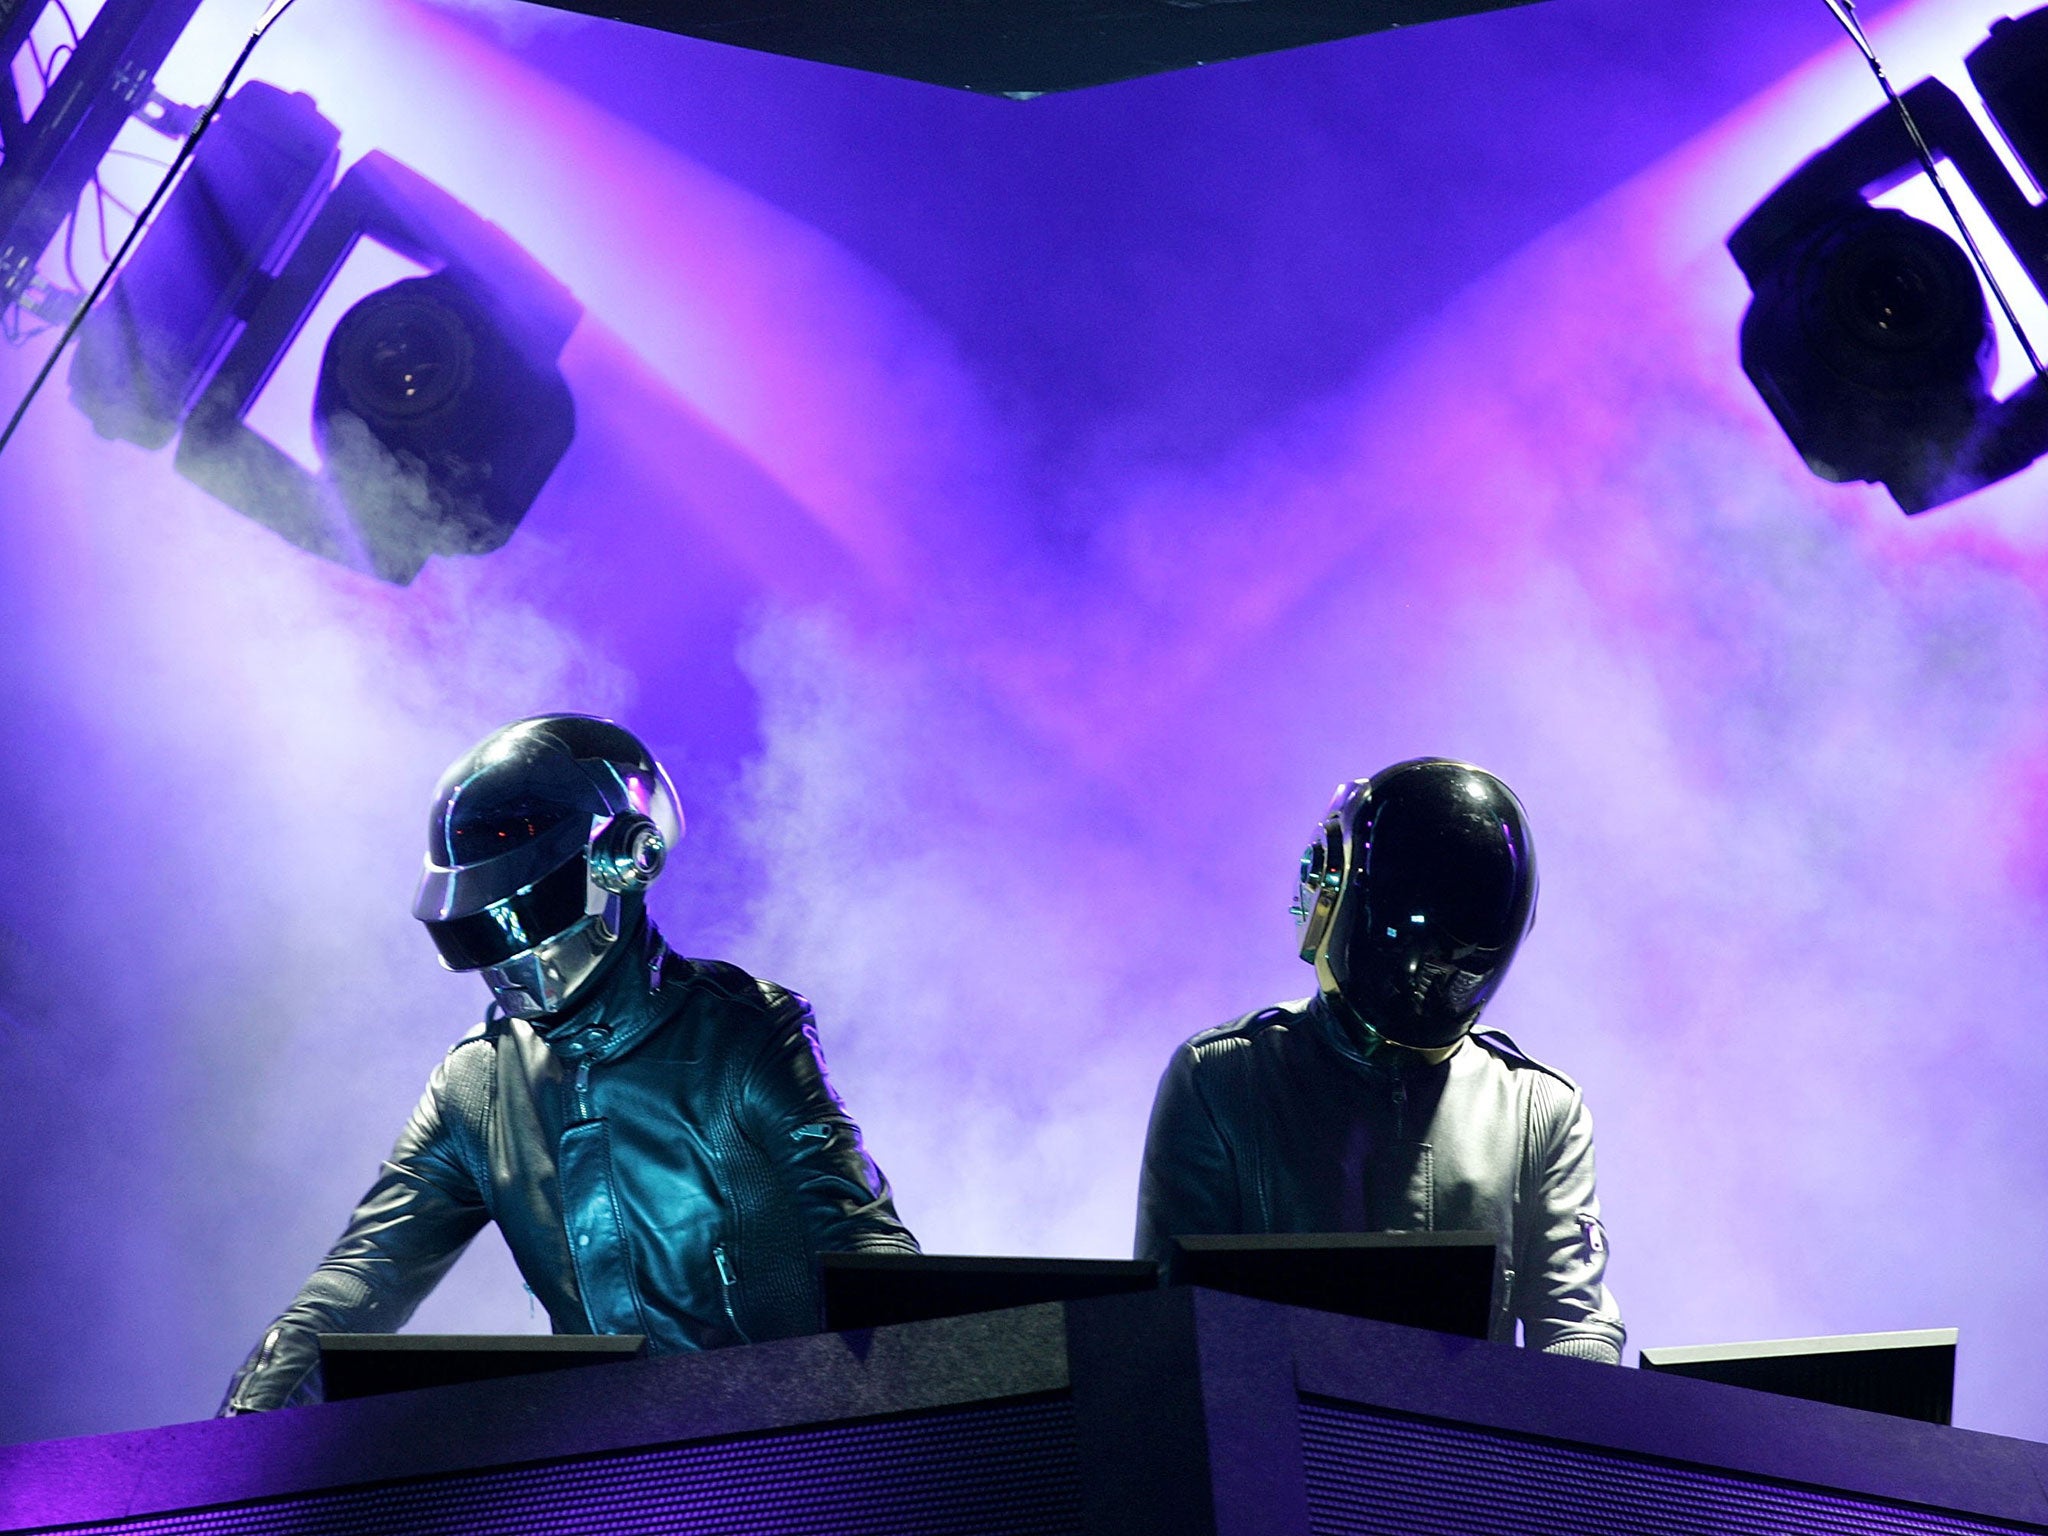 Daft Punk last toured the world in 2007 and seem to do so just once every decade